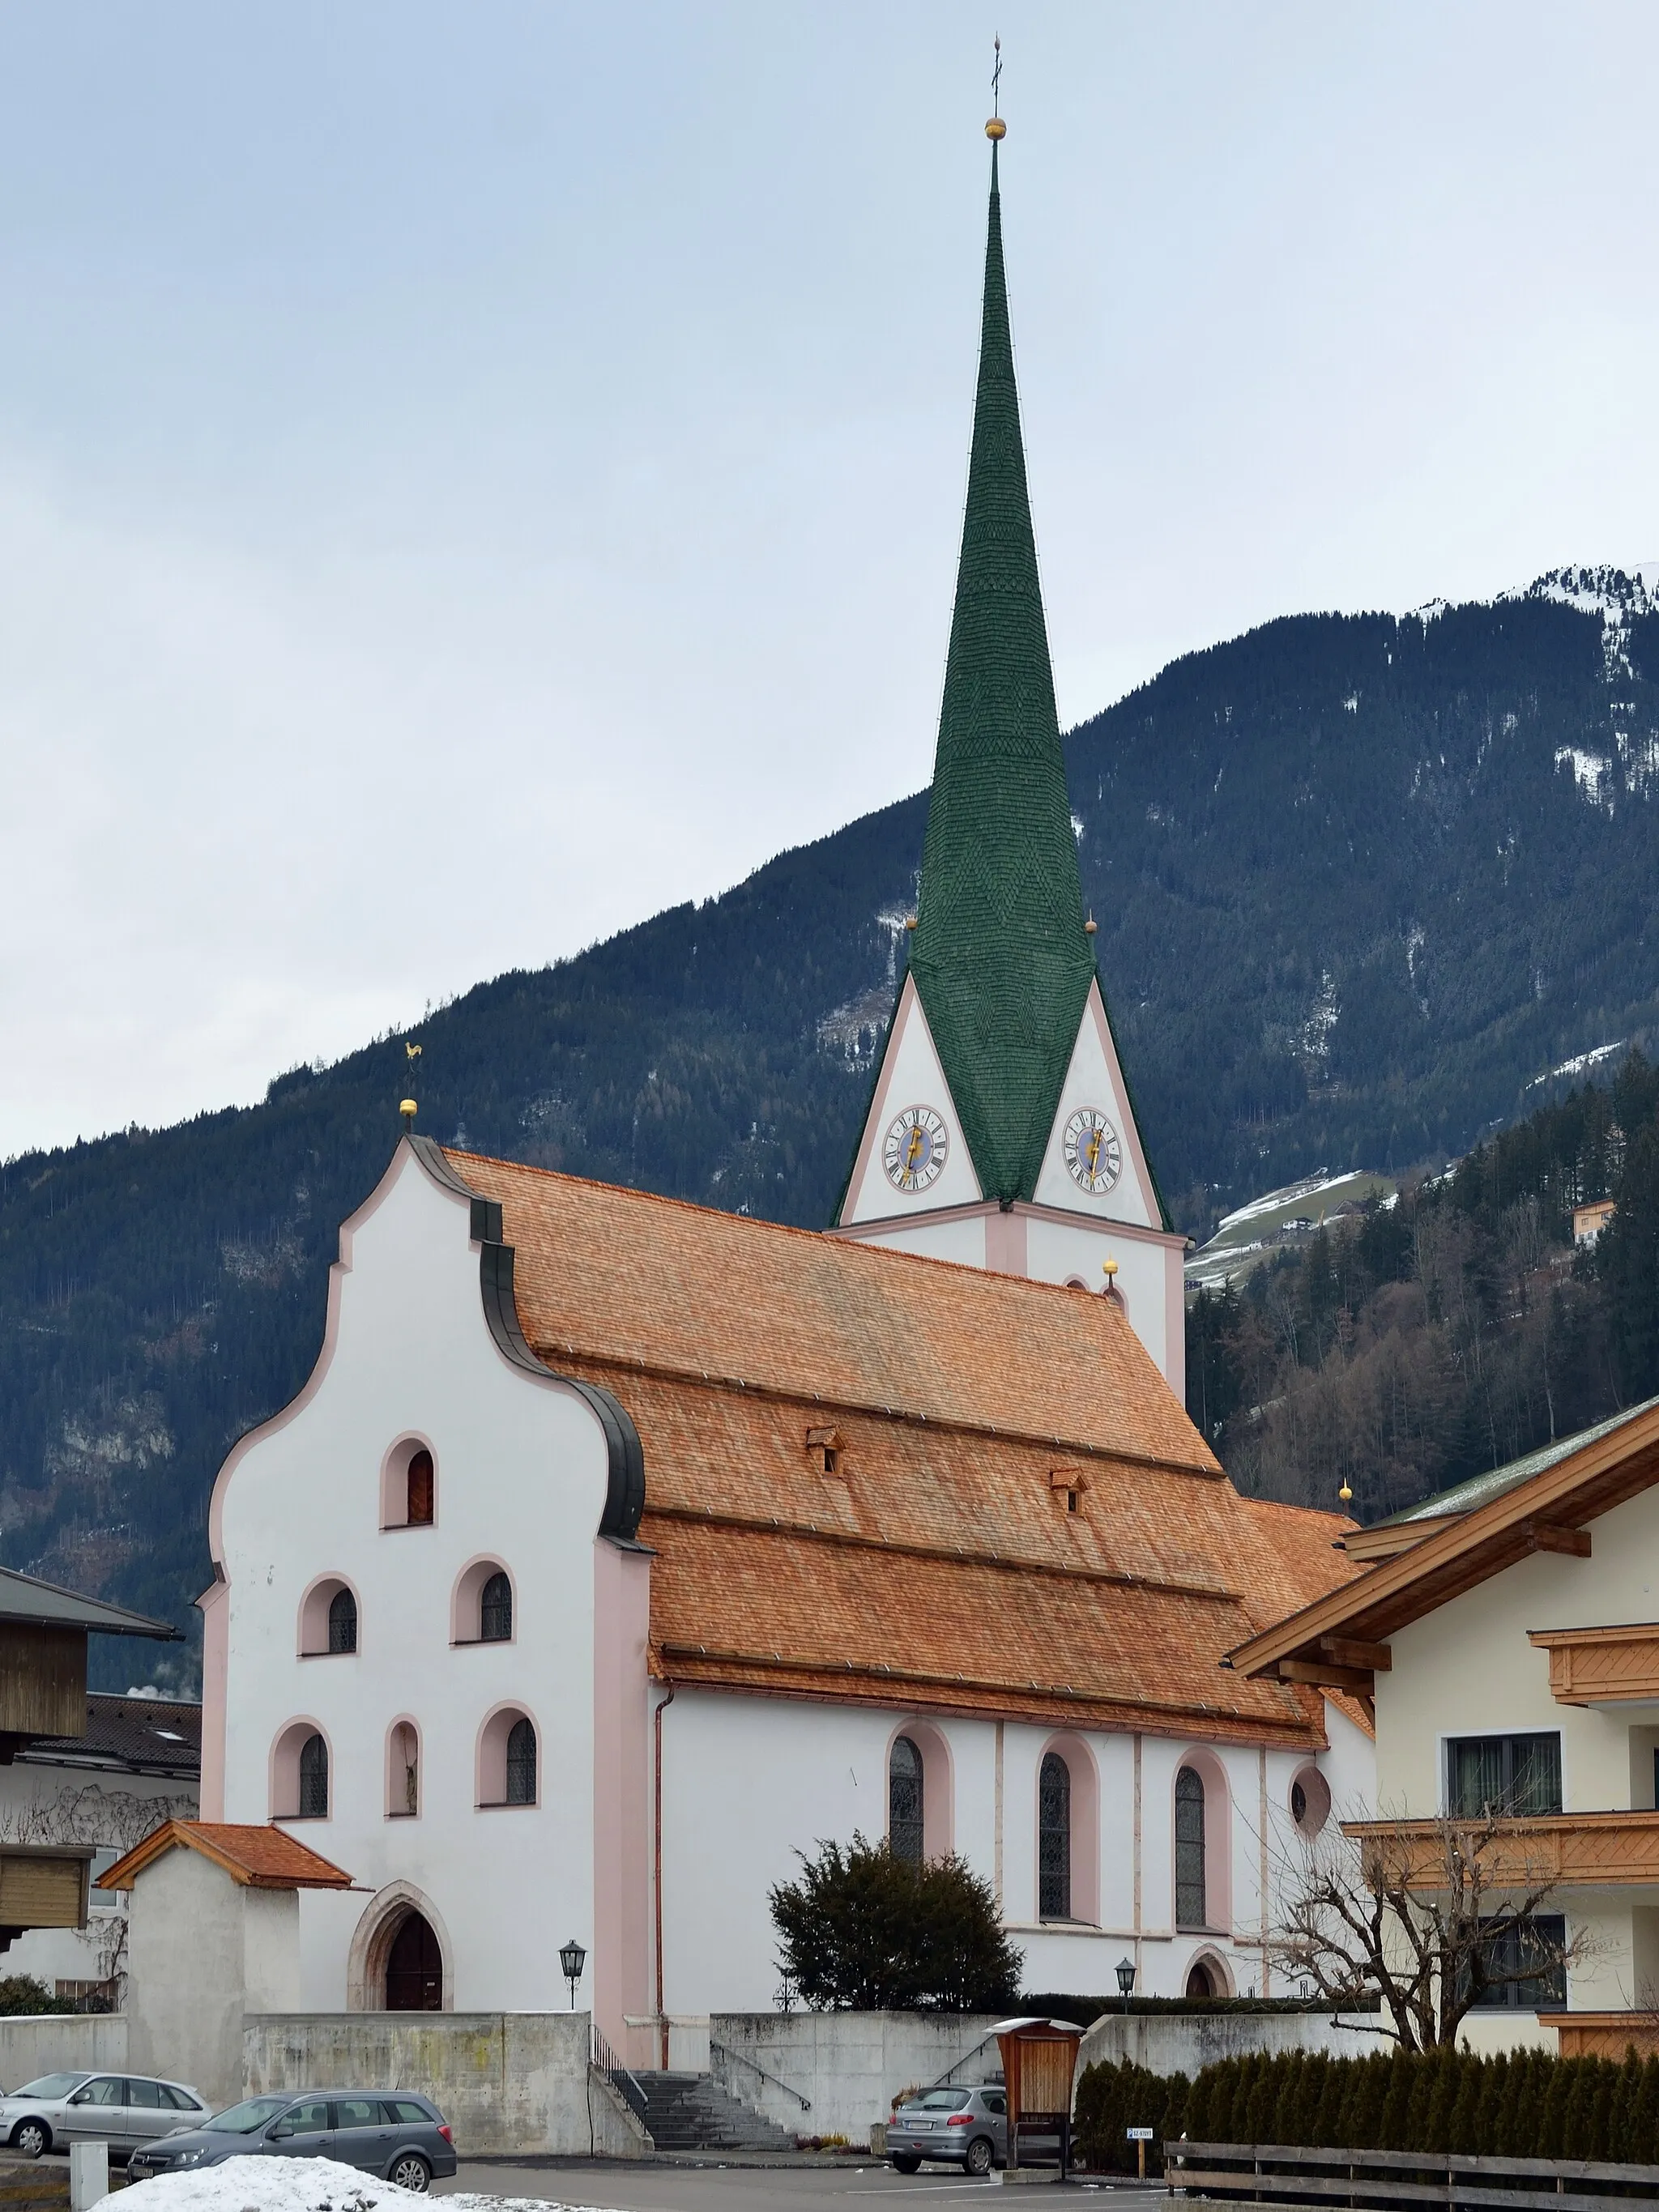 Photo showing: The parish church Saint Rupert (hl. Rupert) in Stumm im Zillertal, Tirol, is protected as a cultural heritage monument.